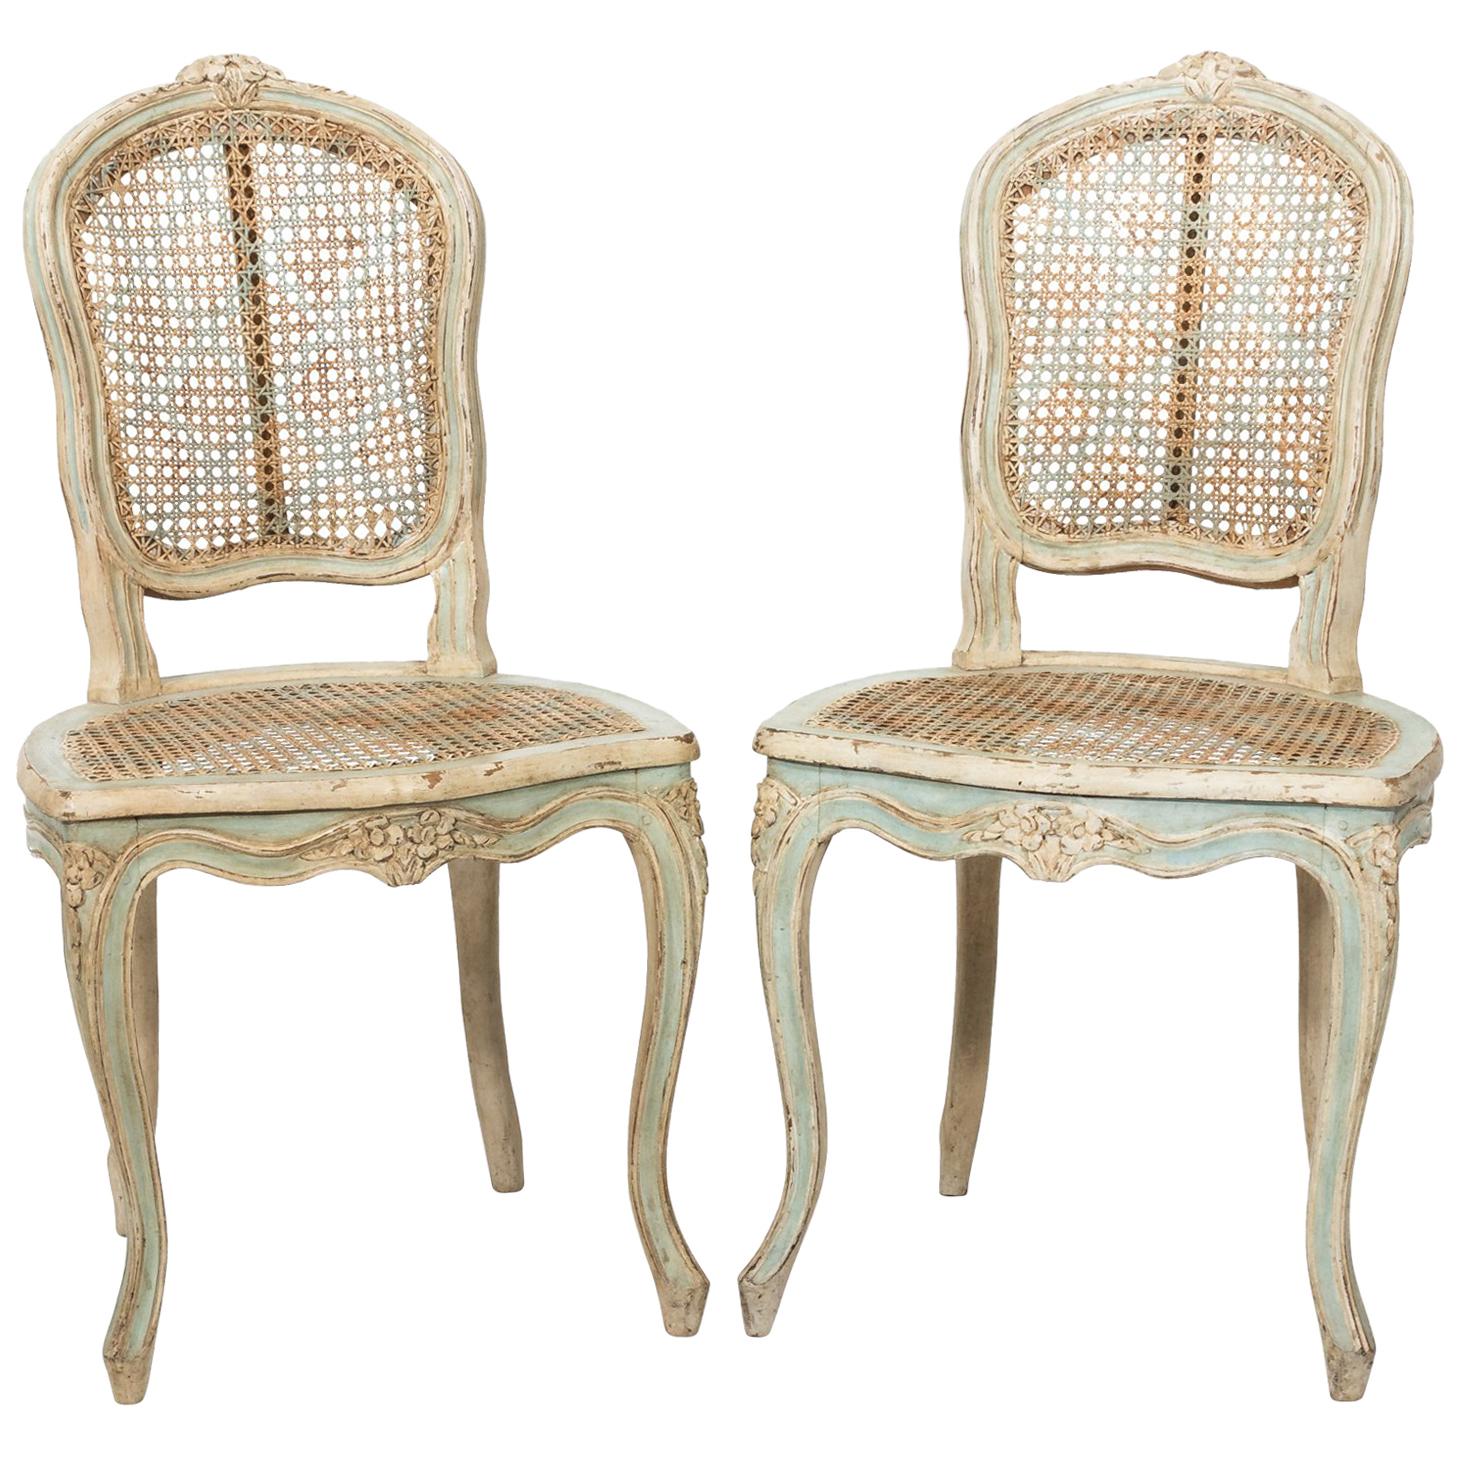 Pair of Louis XV Cane Back Side Chairs